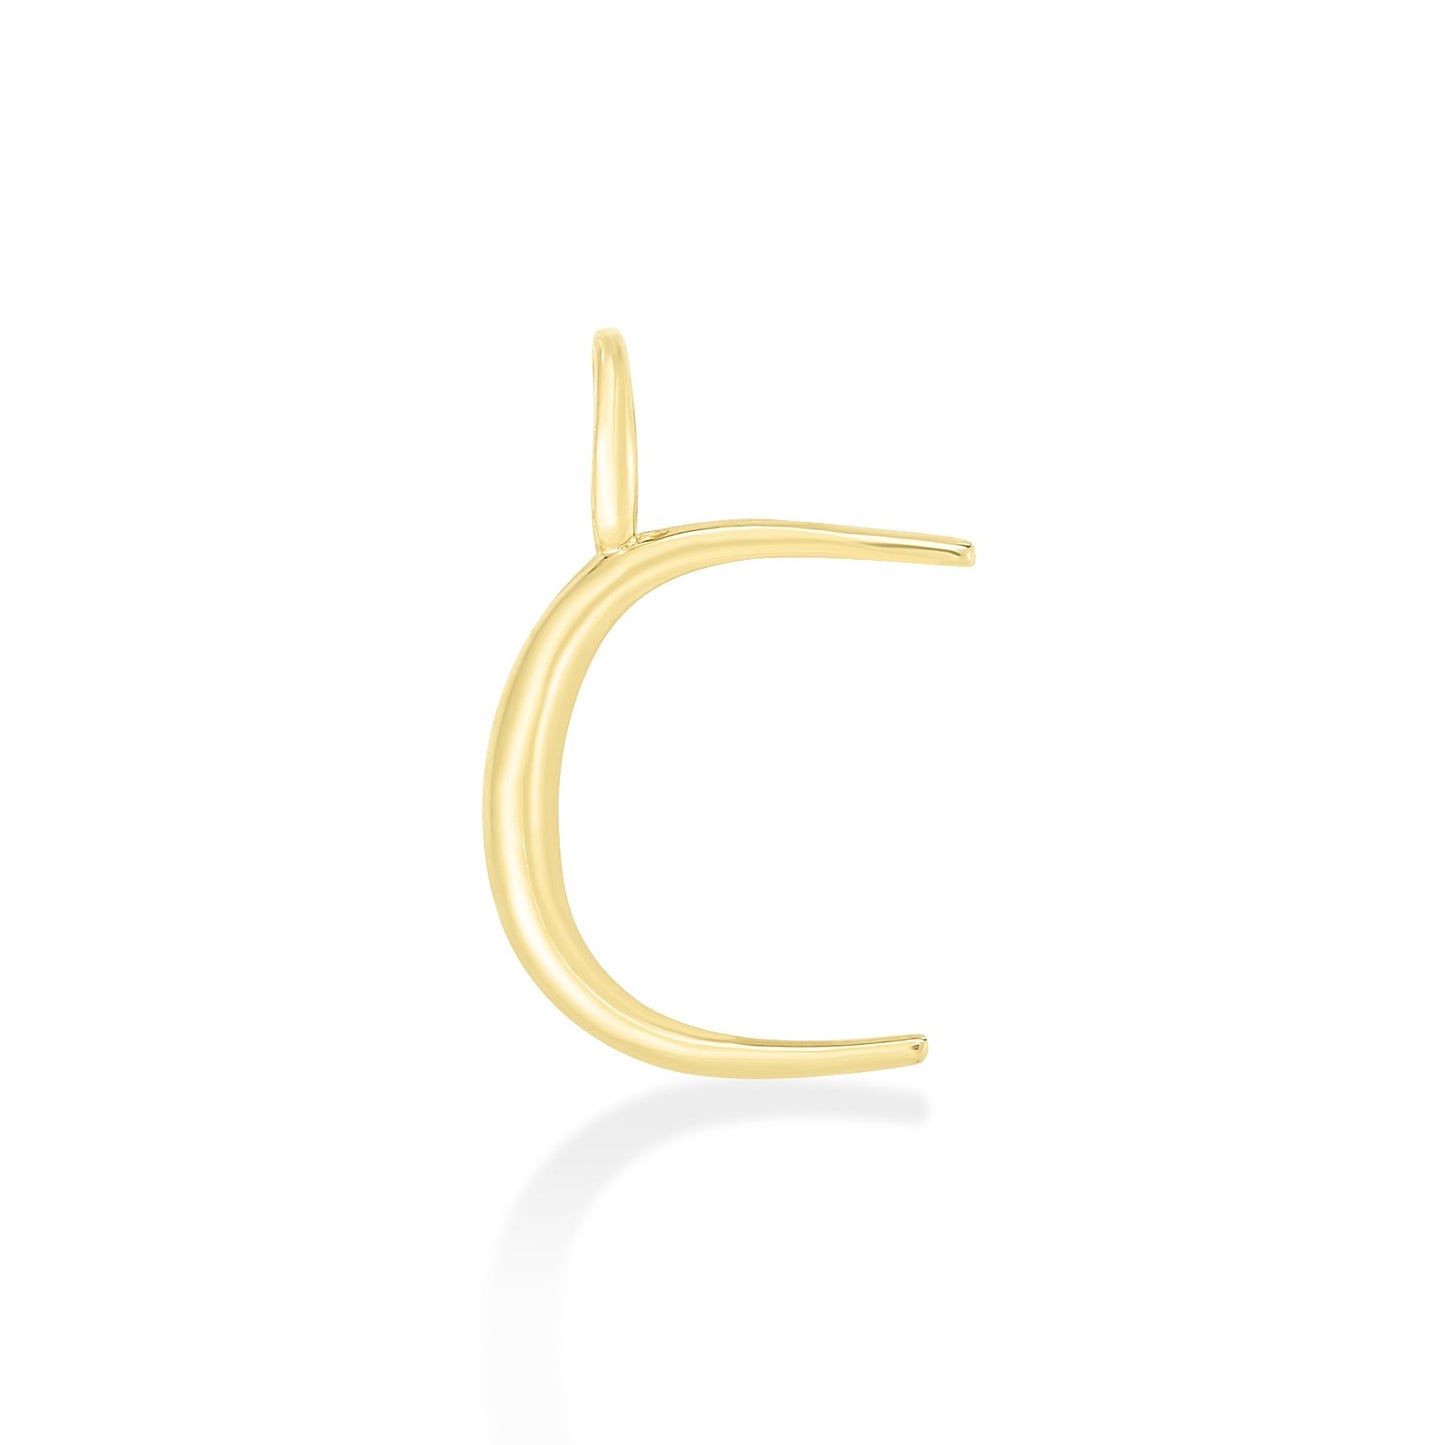 14K yellow gold C letter charm. 